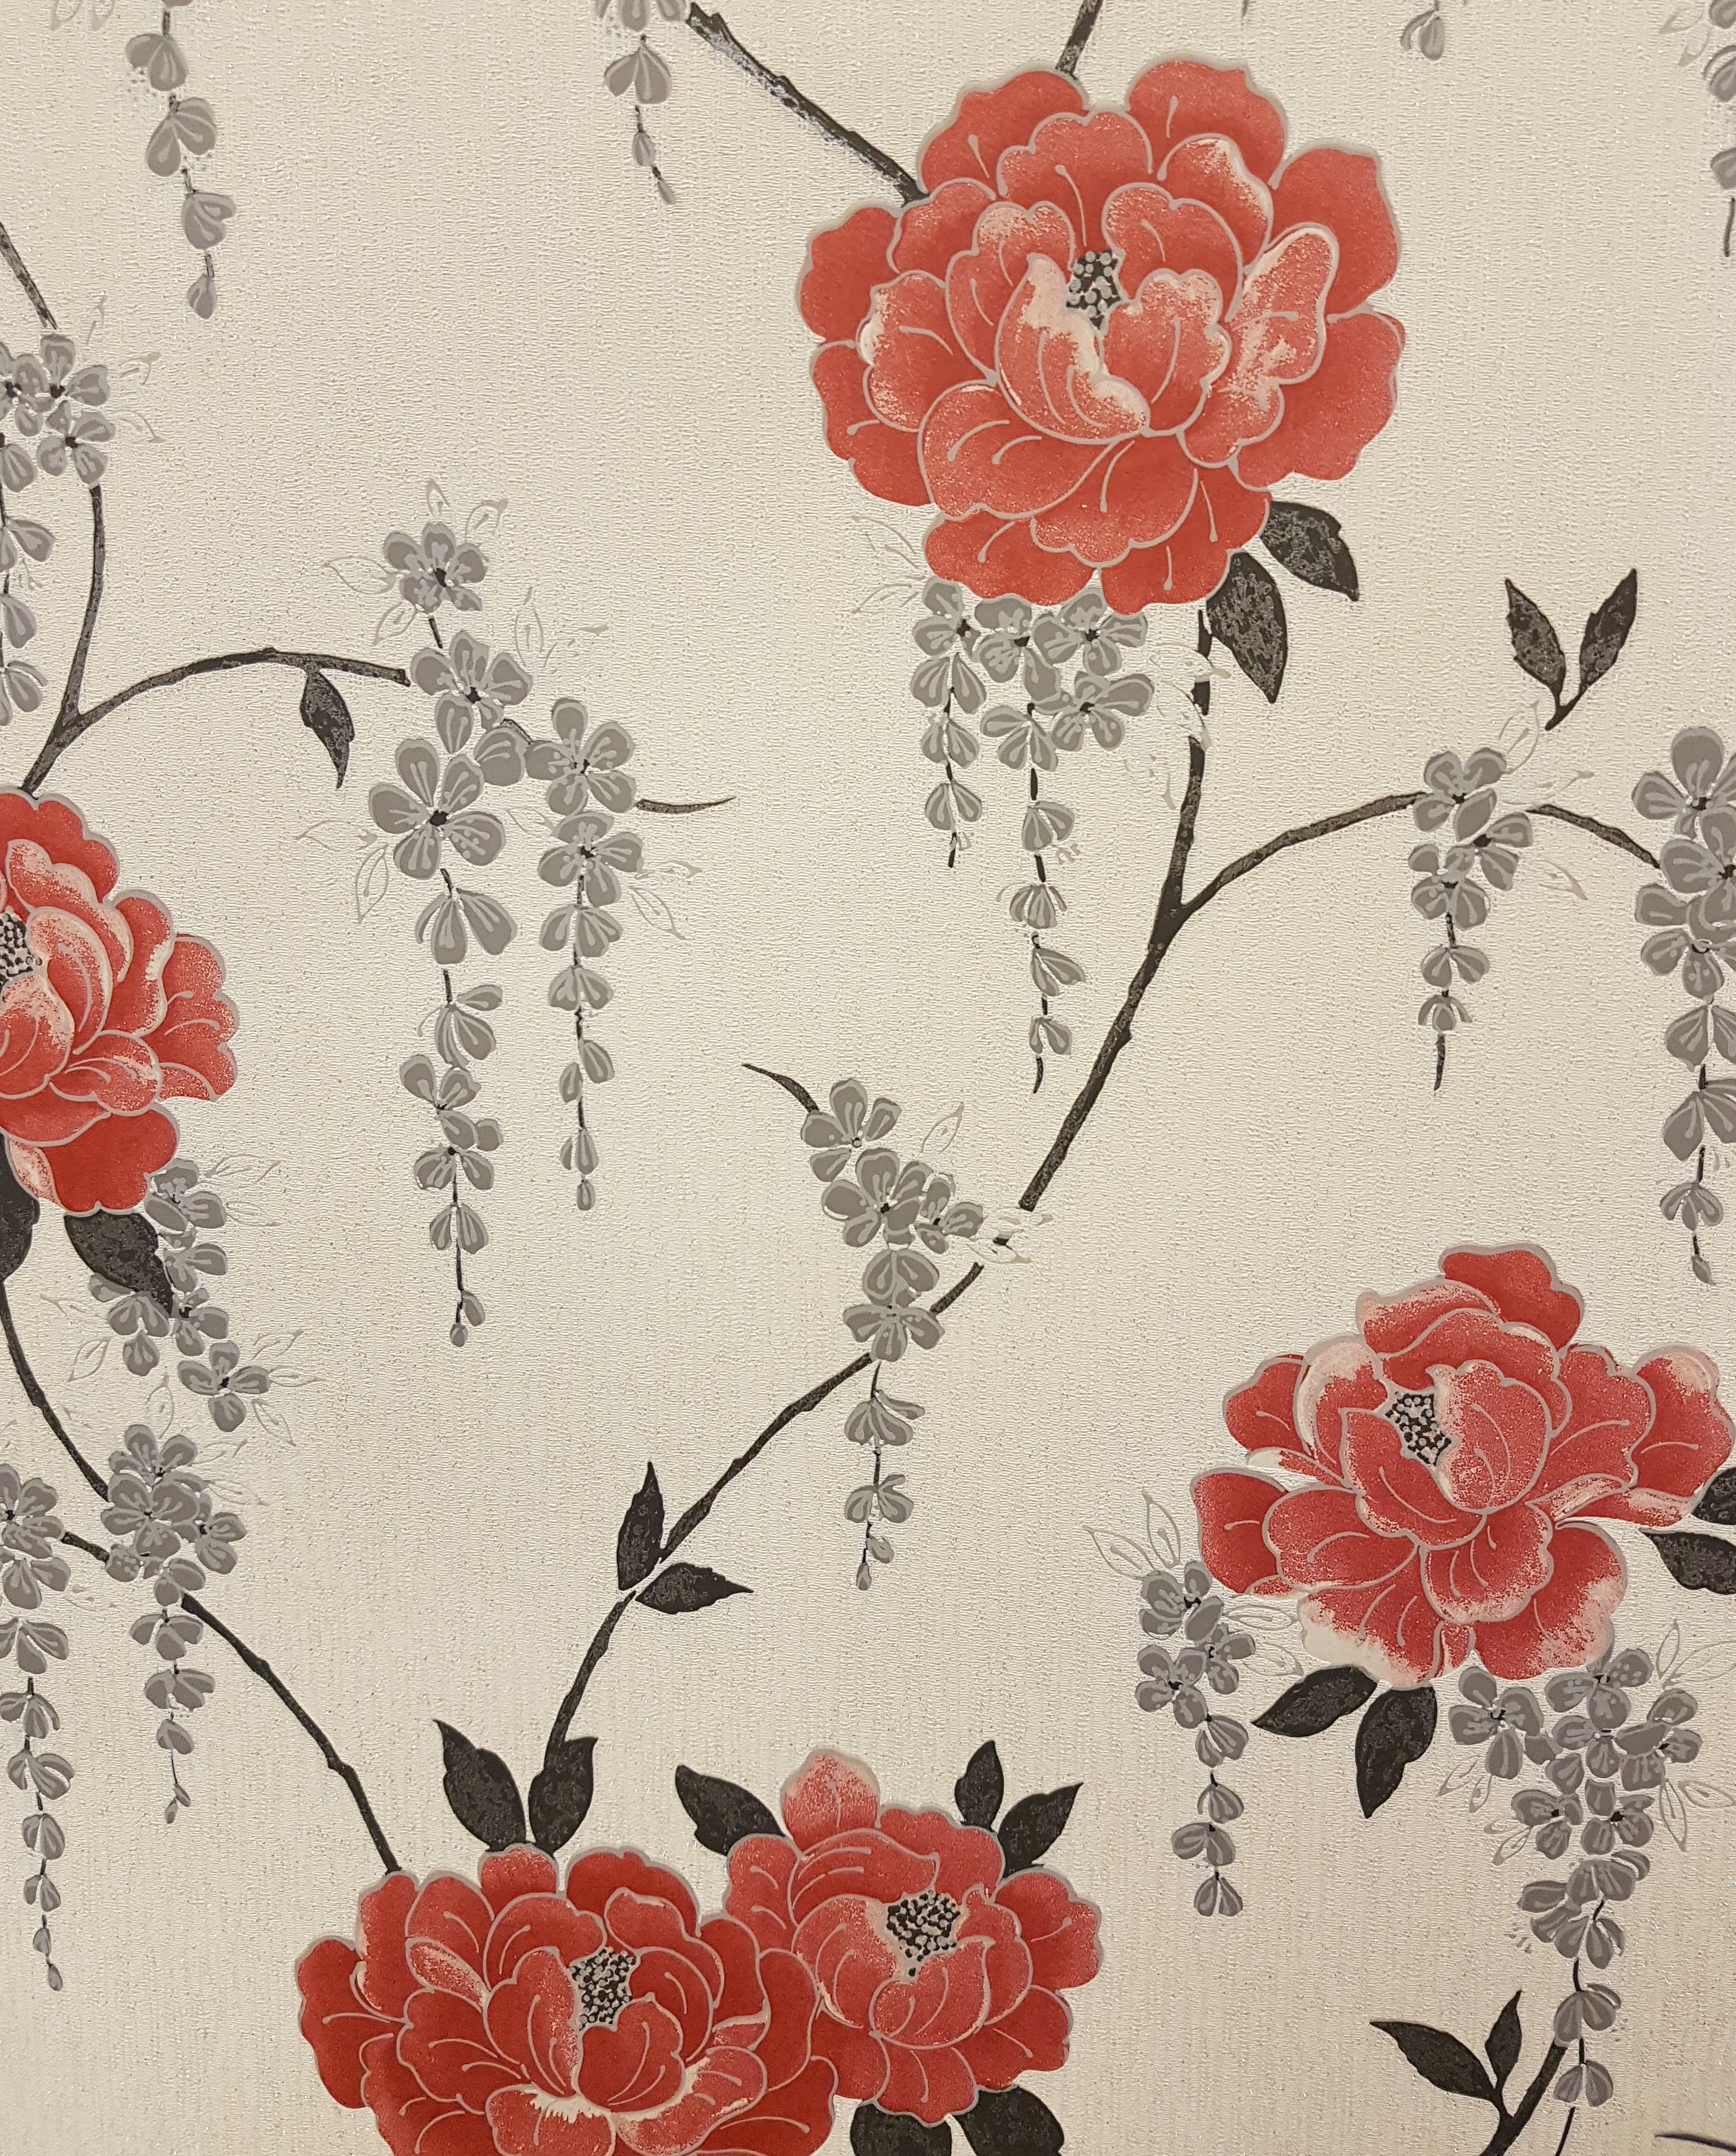 red and brown wallpaper,floral design,flower,wallpaper,pattern,plant